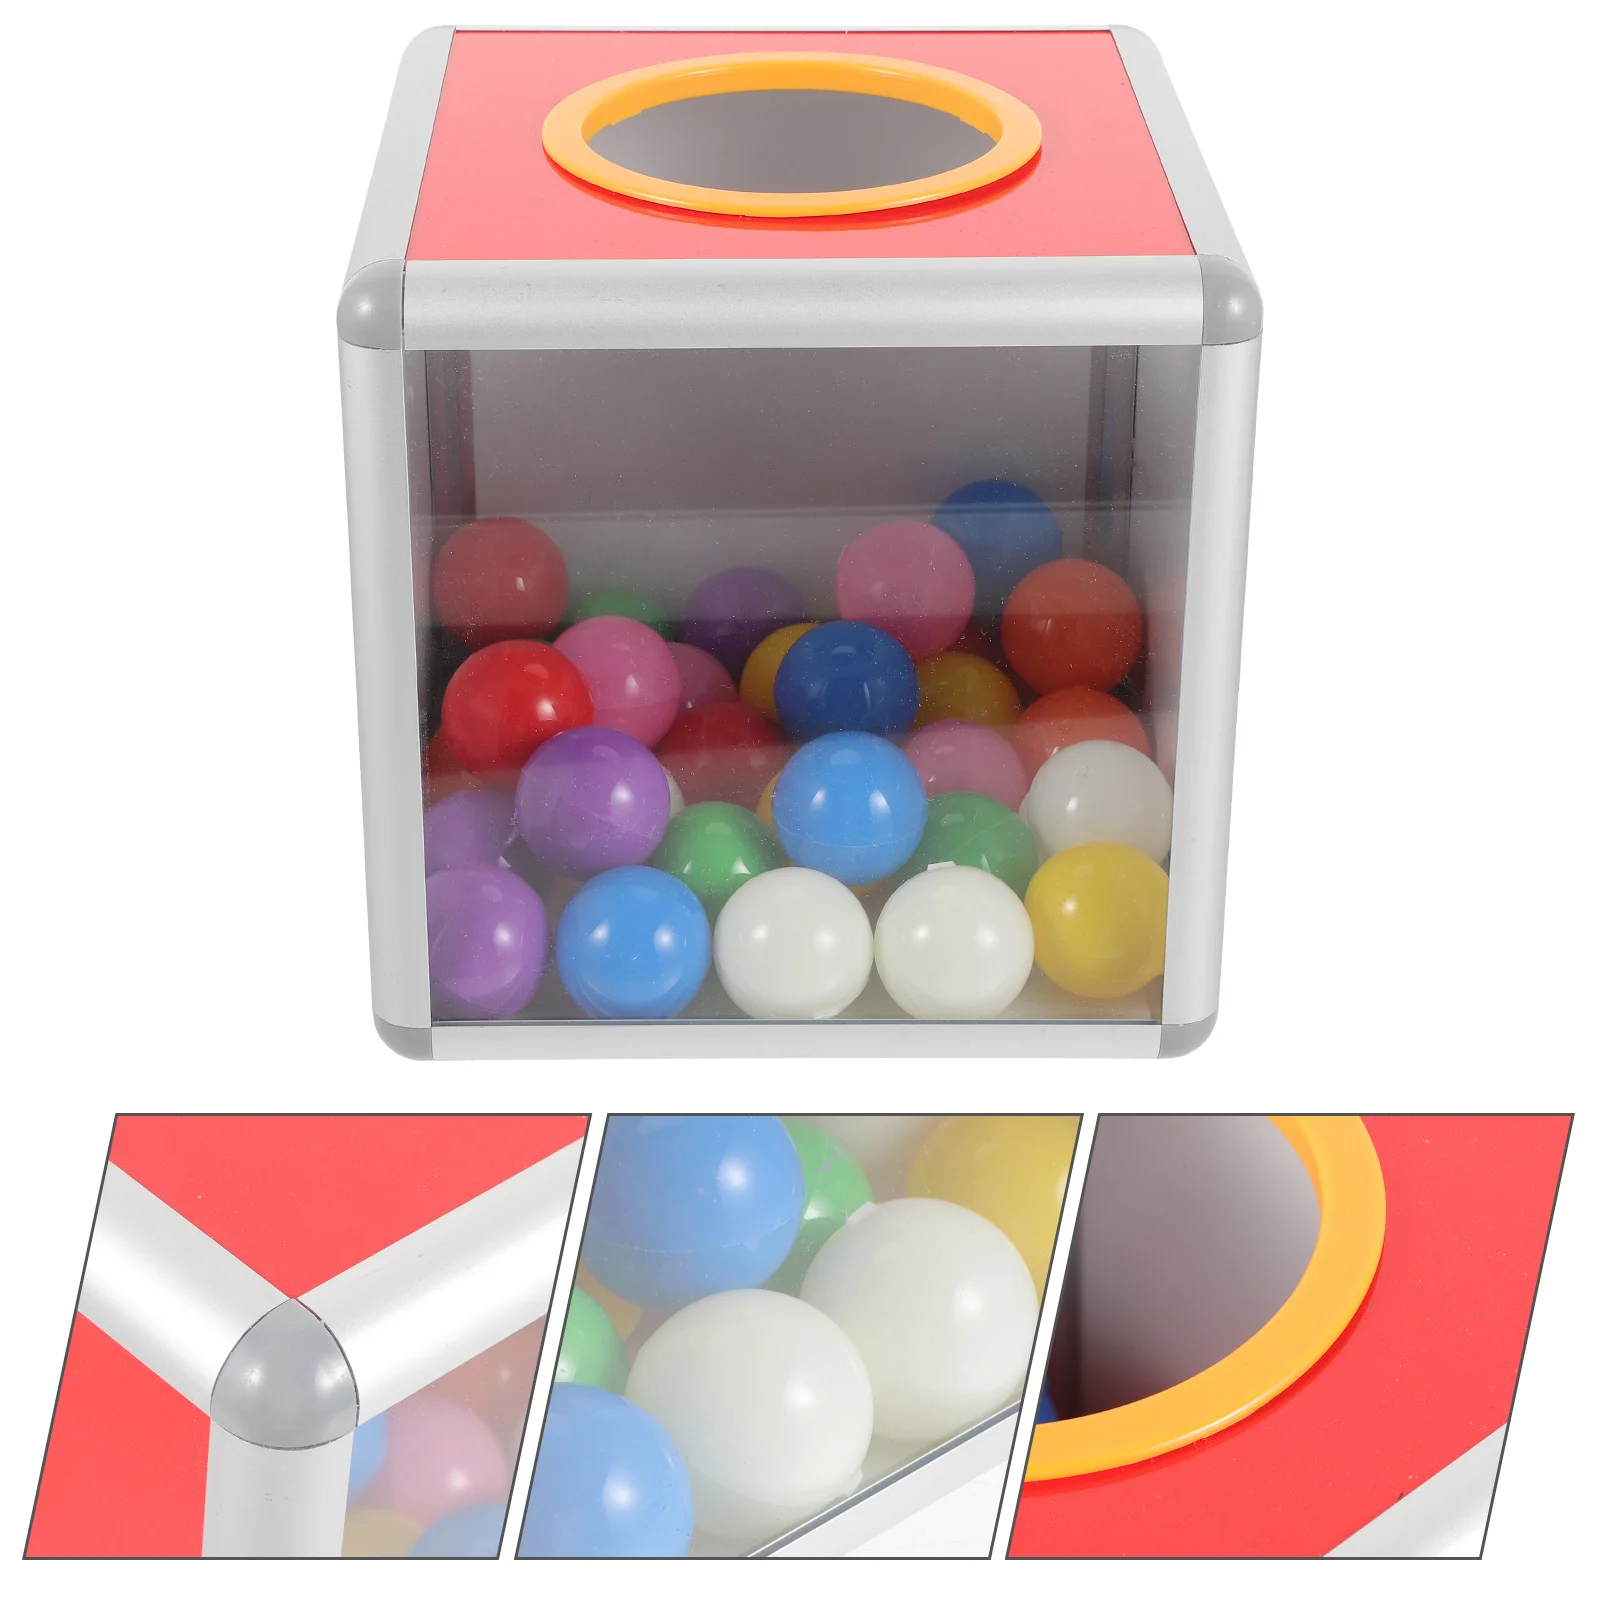 

1 Set of Lottery Box Business Donation Box Cubic Raffle Box Lottery Balls Storage Container